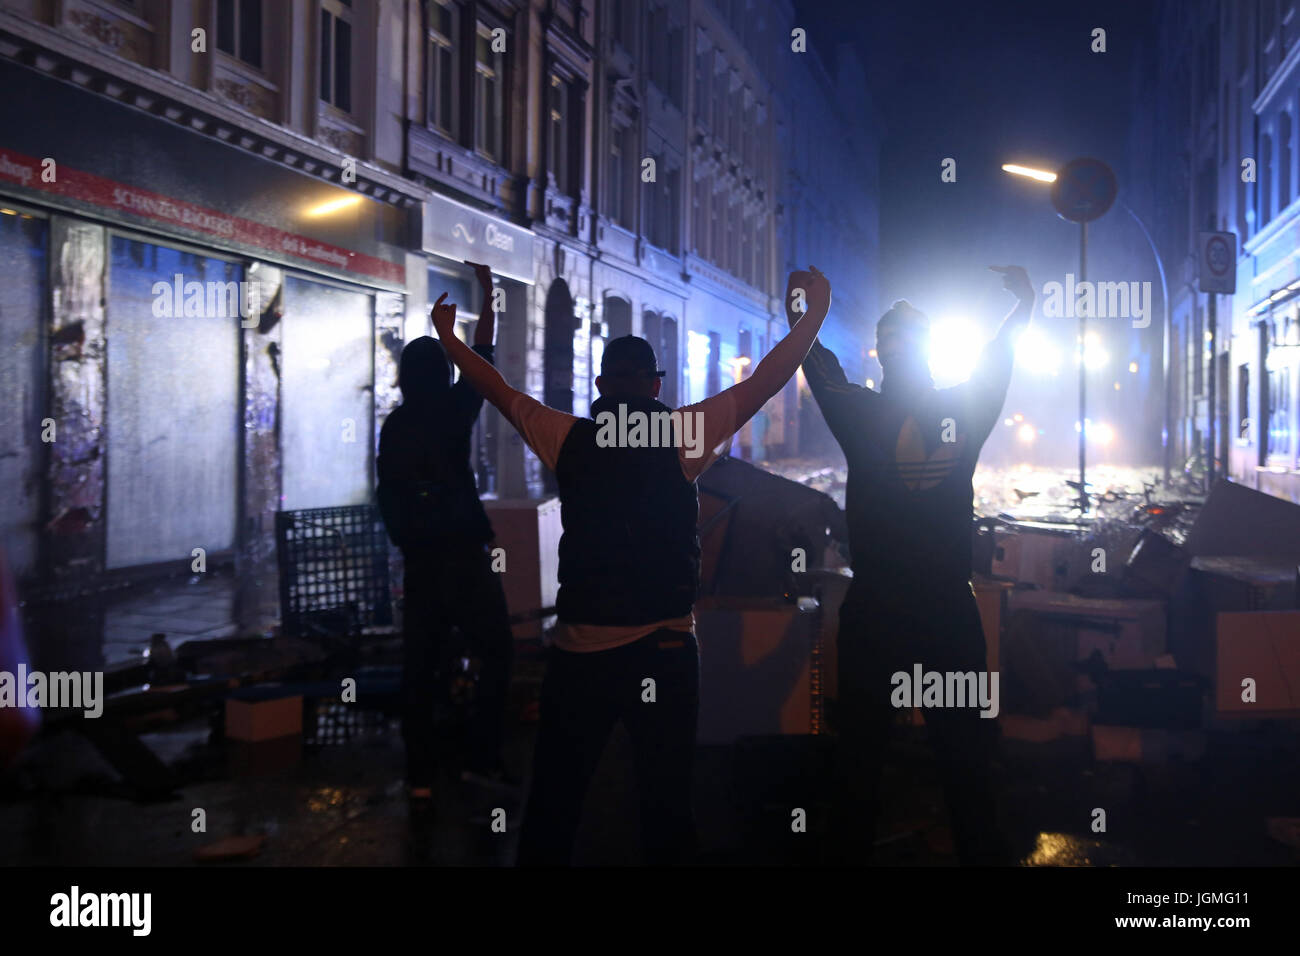 Hamburg, Germany. 07th July, 2017. At a protest against G20 at Schanzenviertel in Hamburg a heavy riot erupted between police and a few demonstrators. Credit: Alexander Pohl/Pacific Press/Alamy Live News Stock Photo